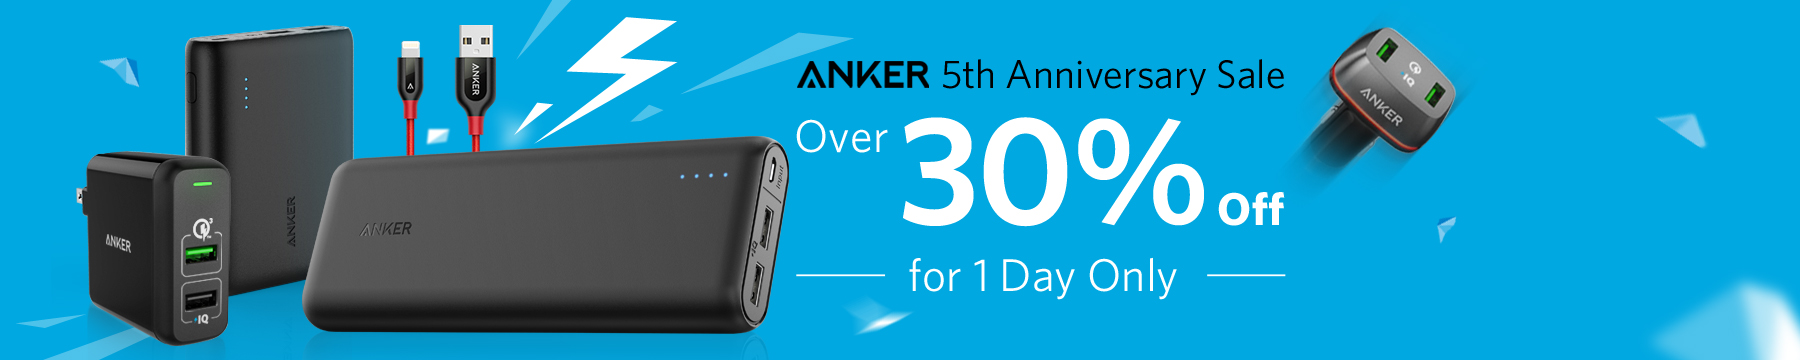 Anker’s 5th Anniversary Sale – Save 30% for 1 Day Only! Prices start at $7.49!